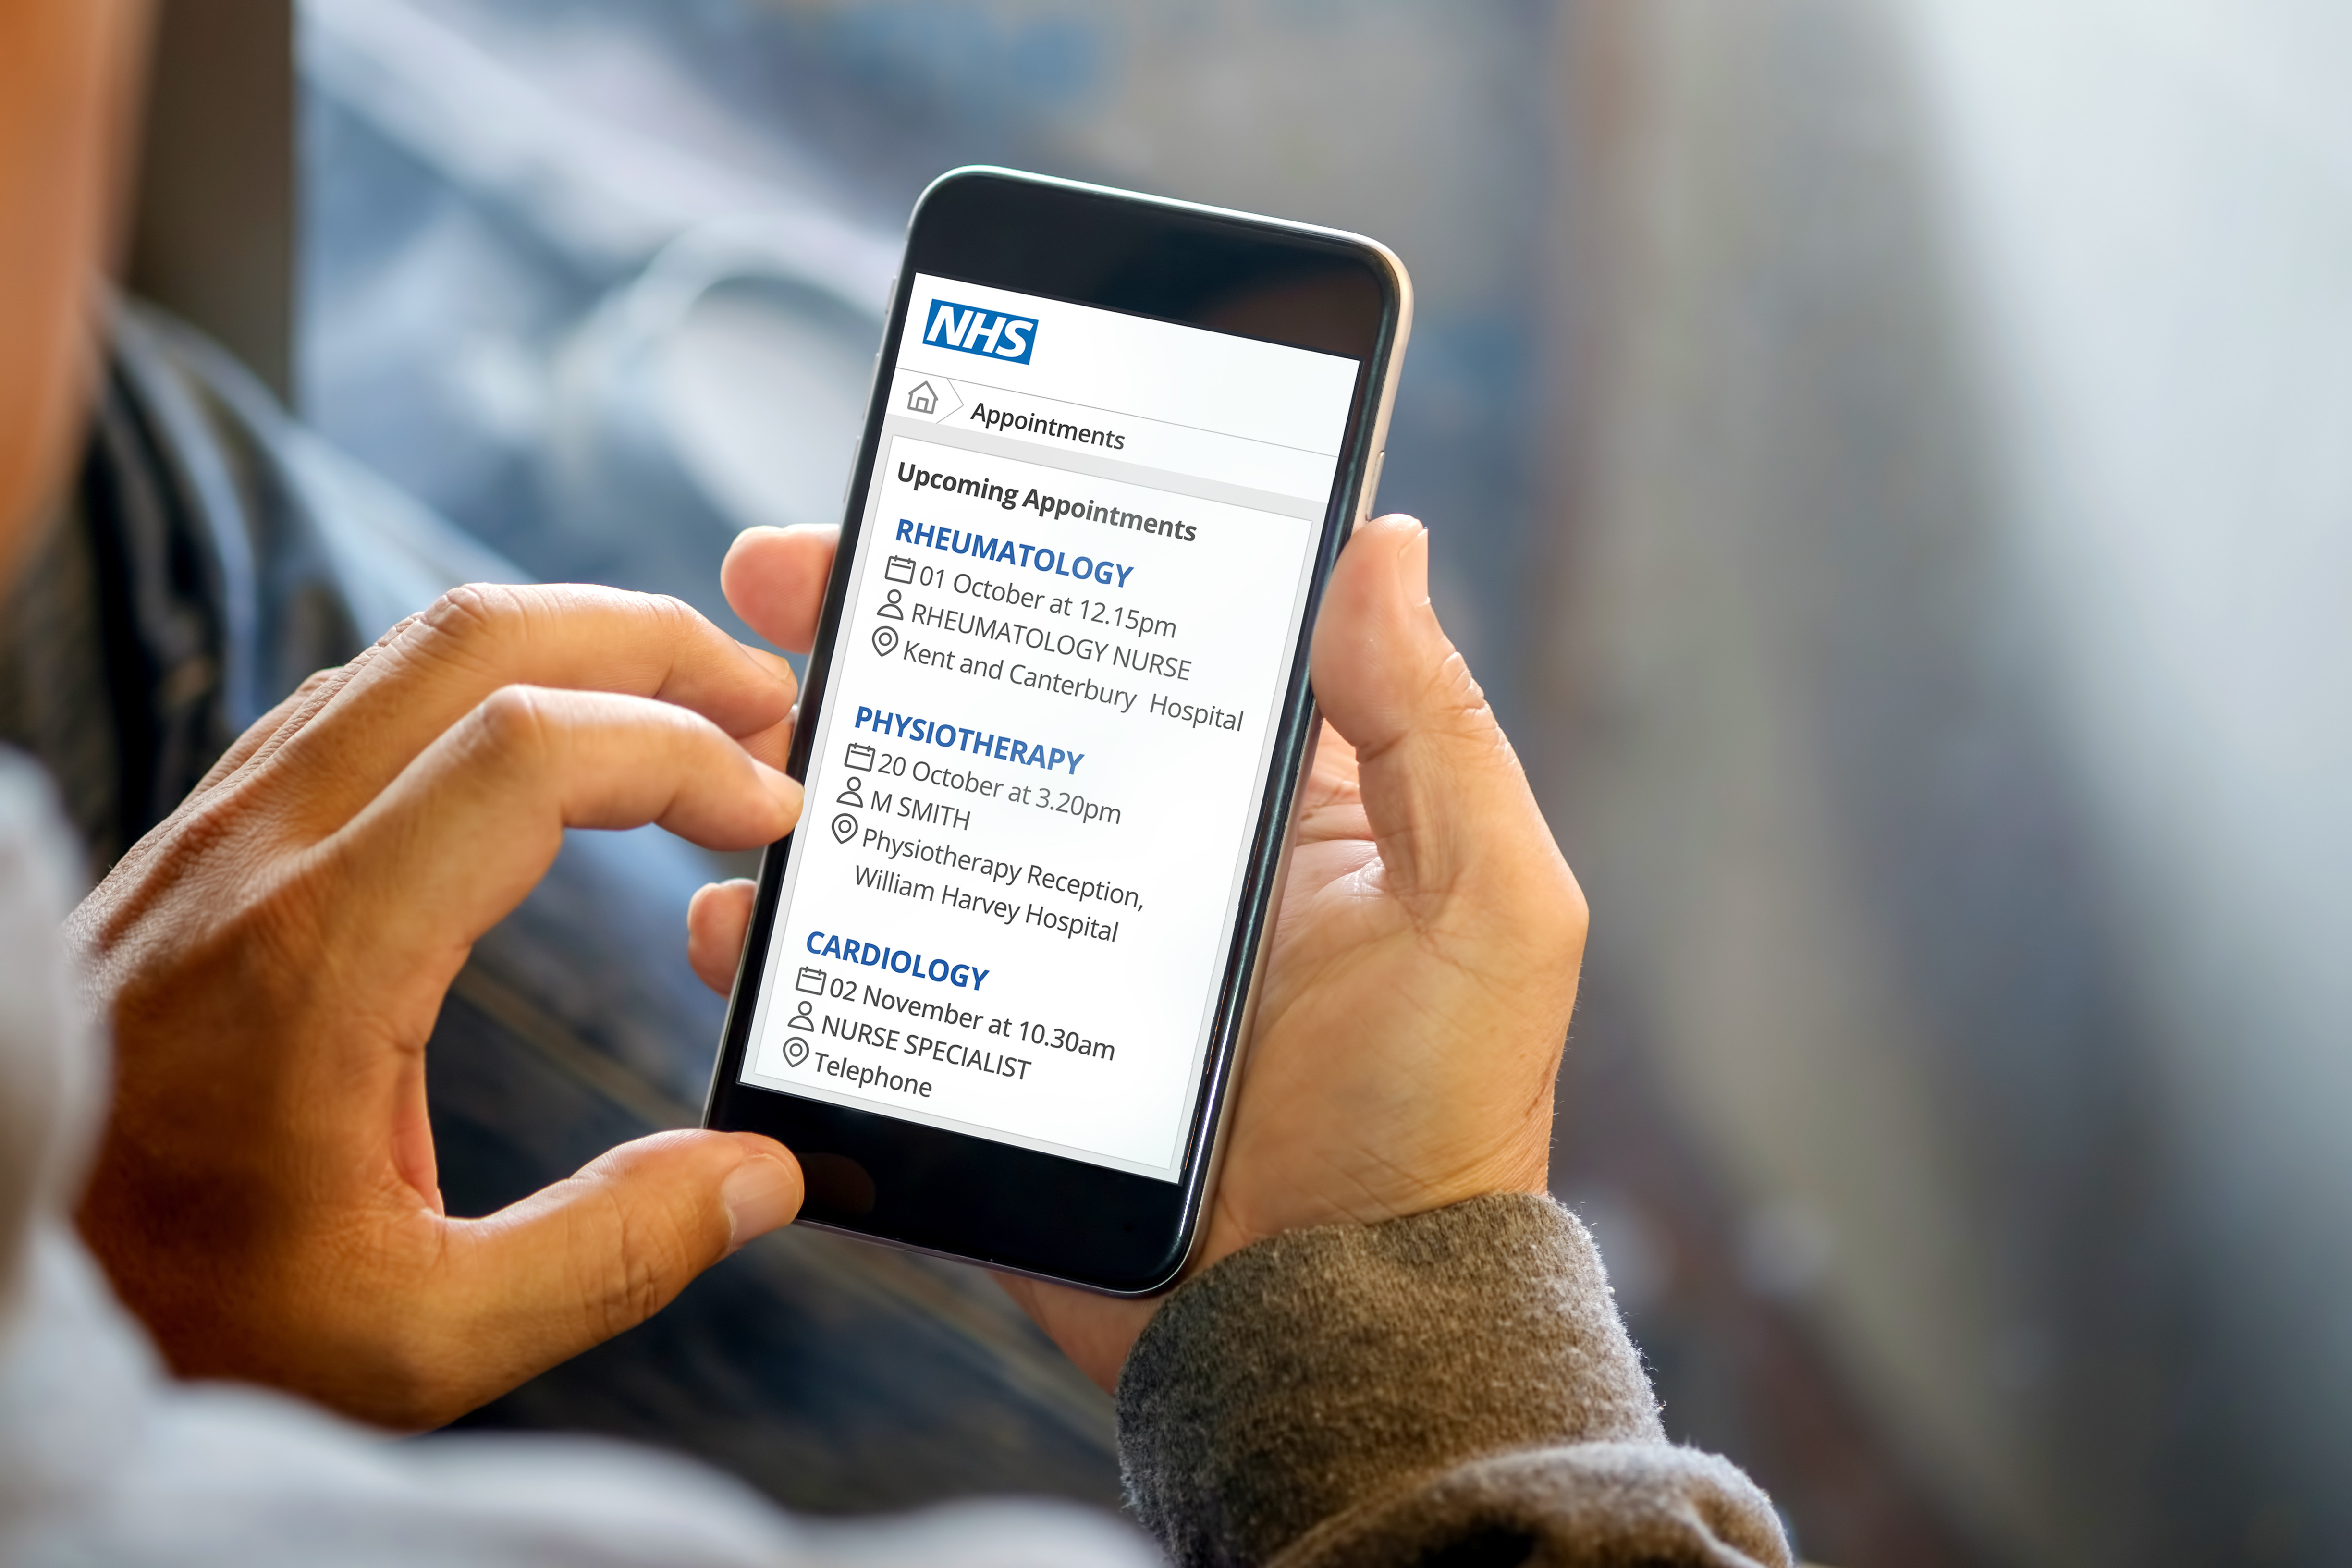 Our Patient Portal appointment screen on a mobile phone screen